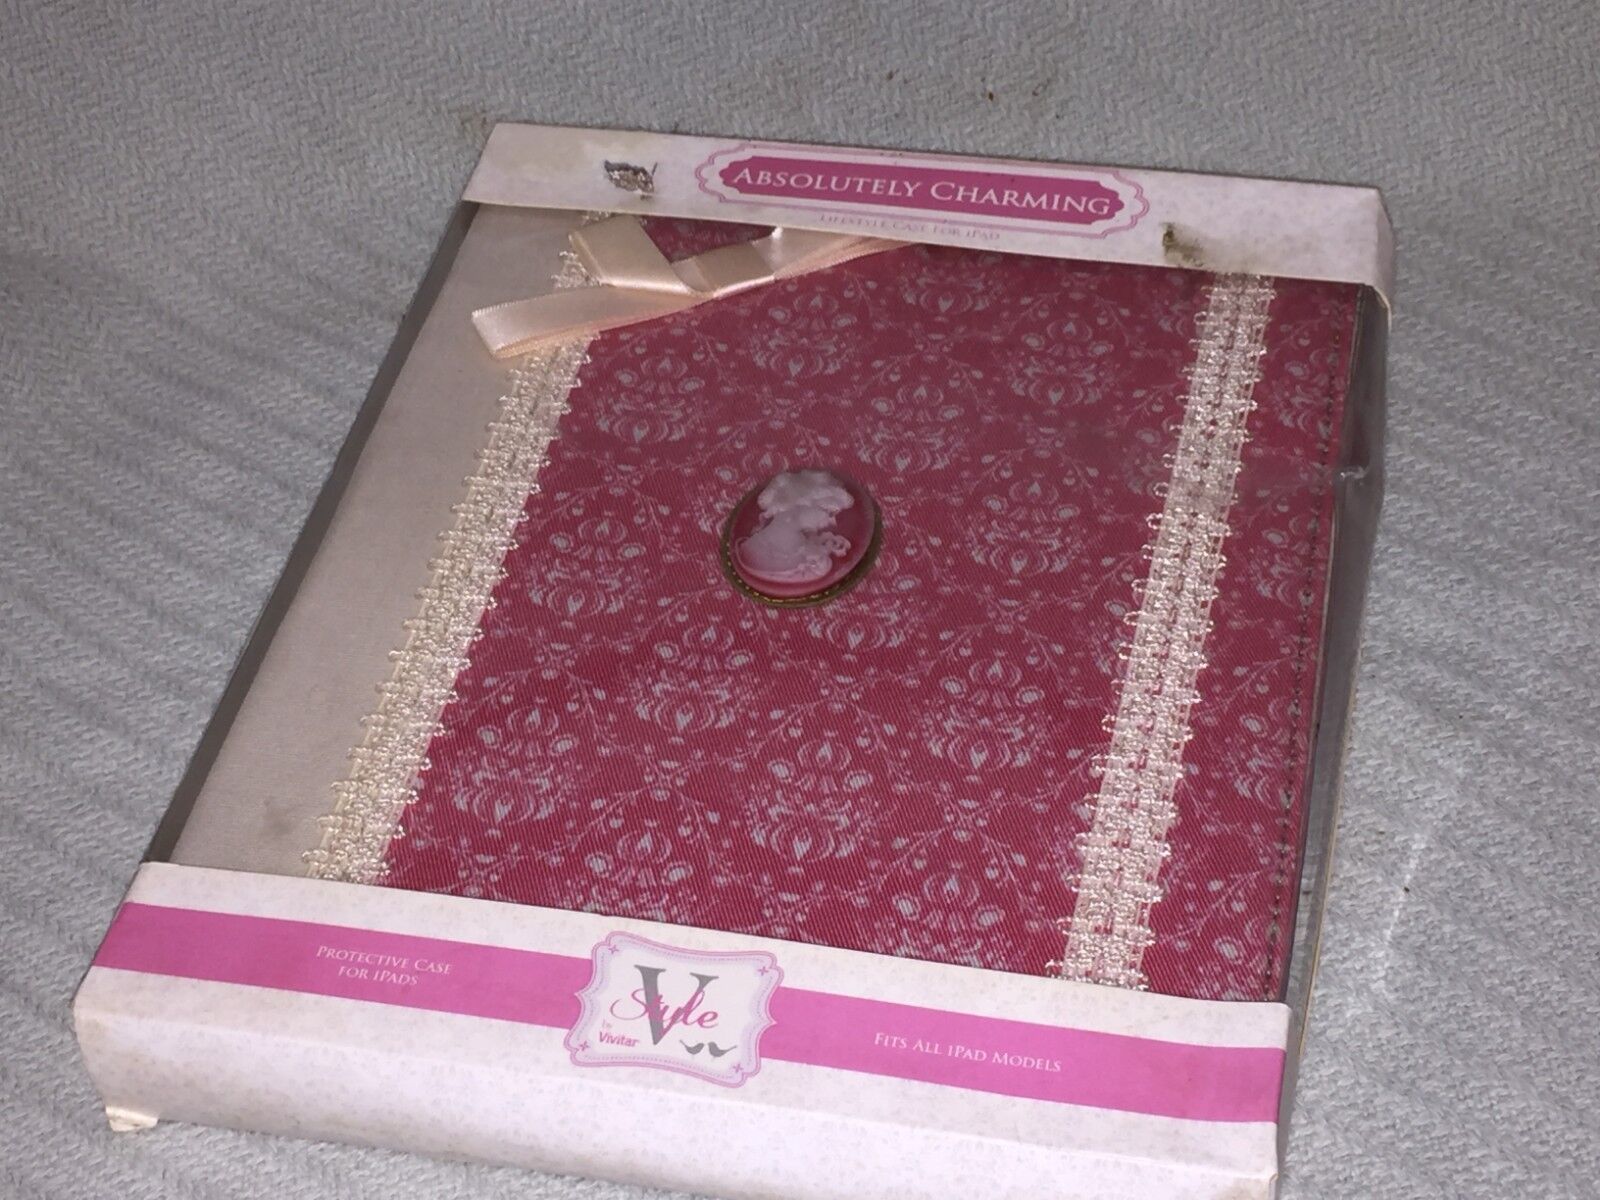 V-Style by Vivitar Absolutely Charming PINK Lifestyle For iPad 買い取り Case RJFP-1000 高価値セリー ~